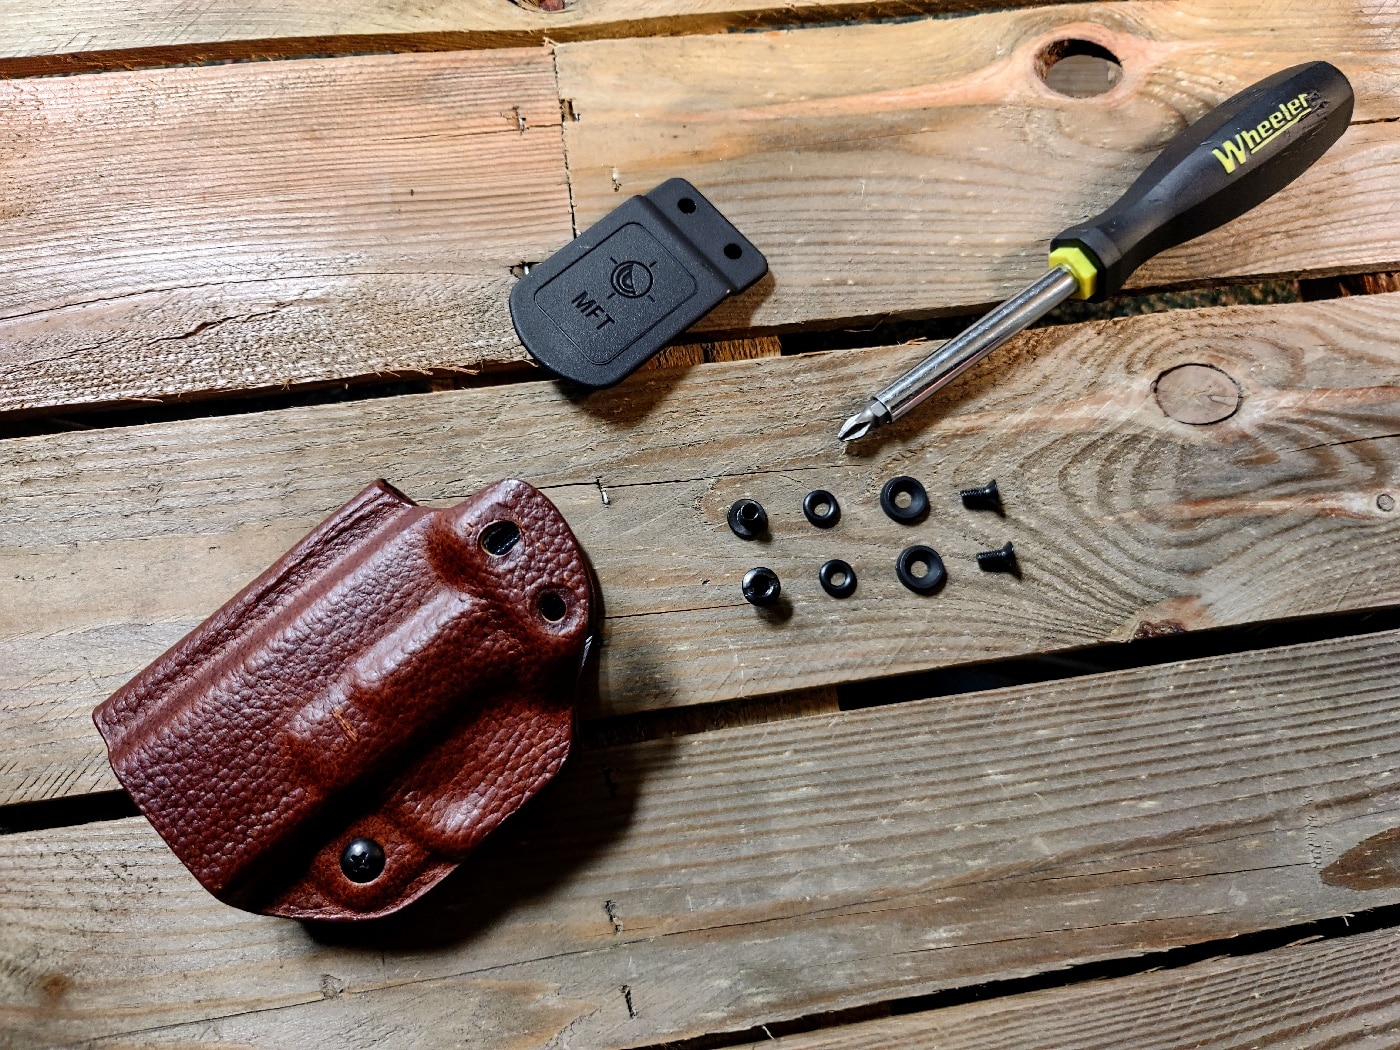 Shown here is the holster being adjusted by the author with a screwdriver. The Mission First Tactical holster can be adjusted by the user so that it can be used as OWB, AIWB or IWB — plus it can be used on the right or left side of the body.